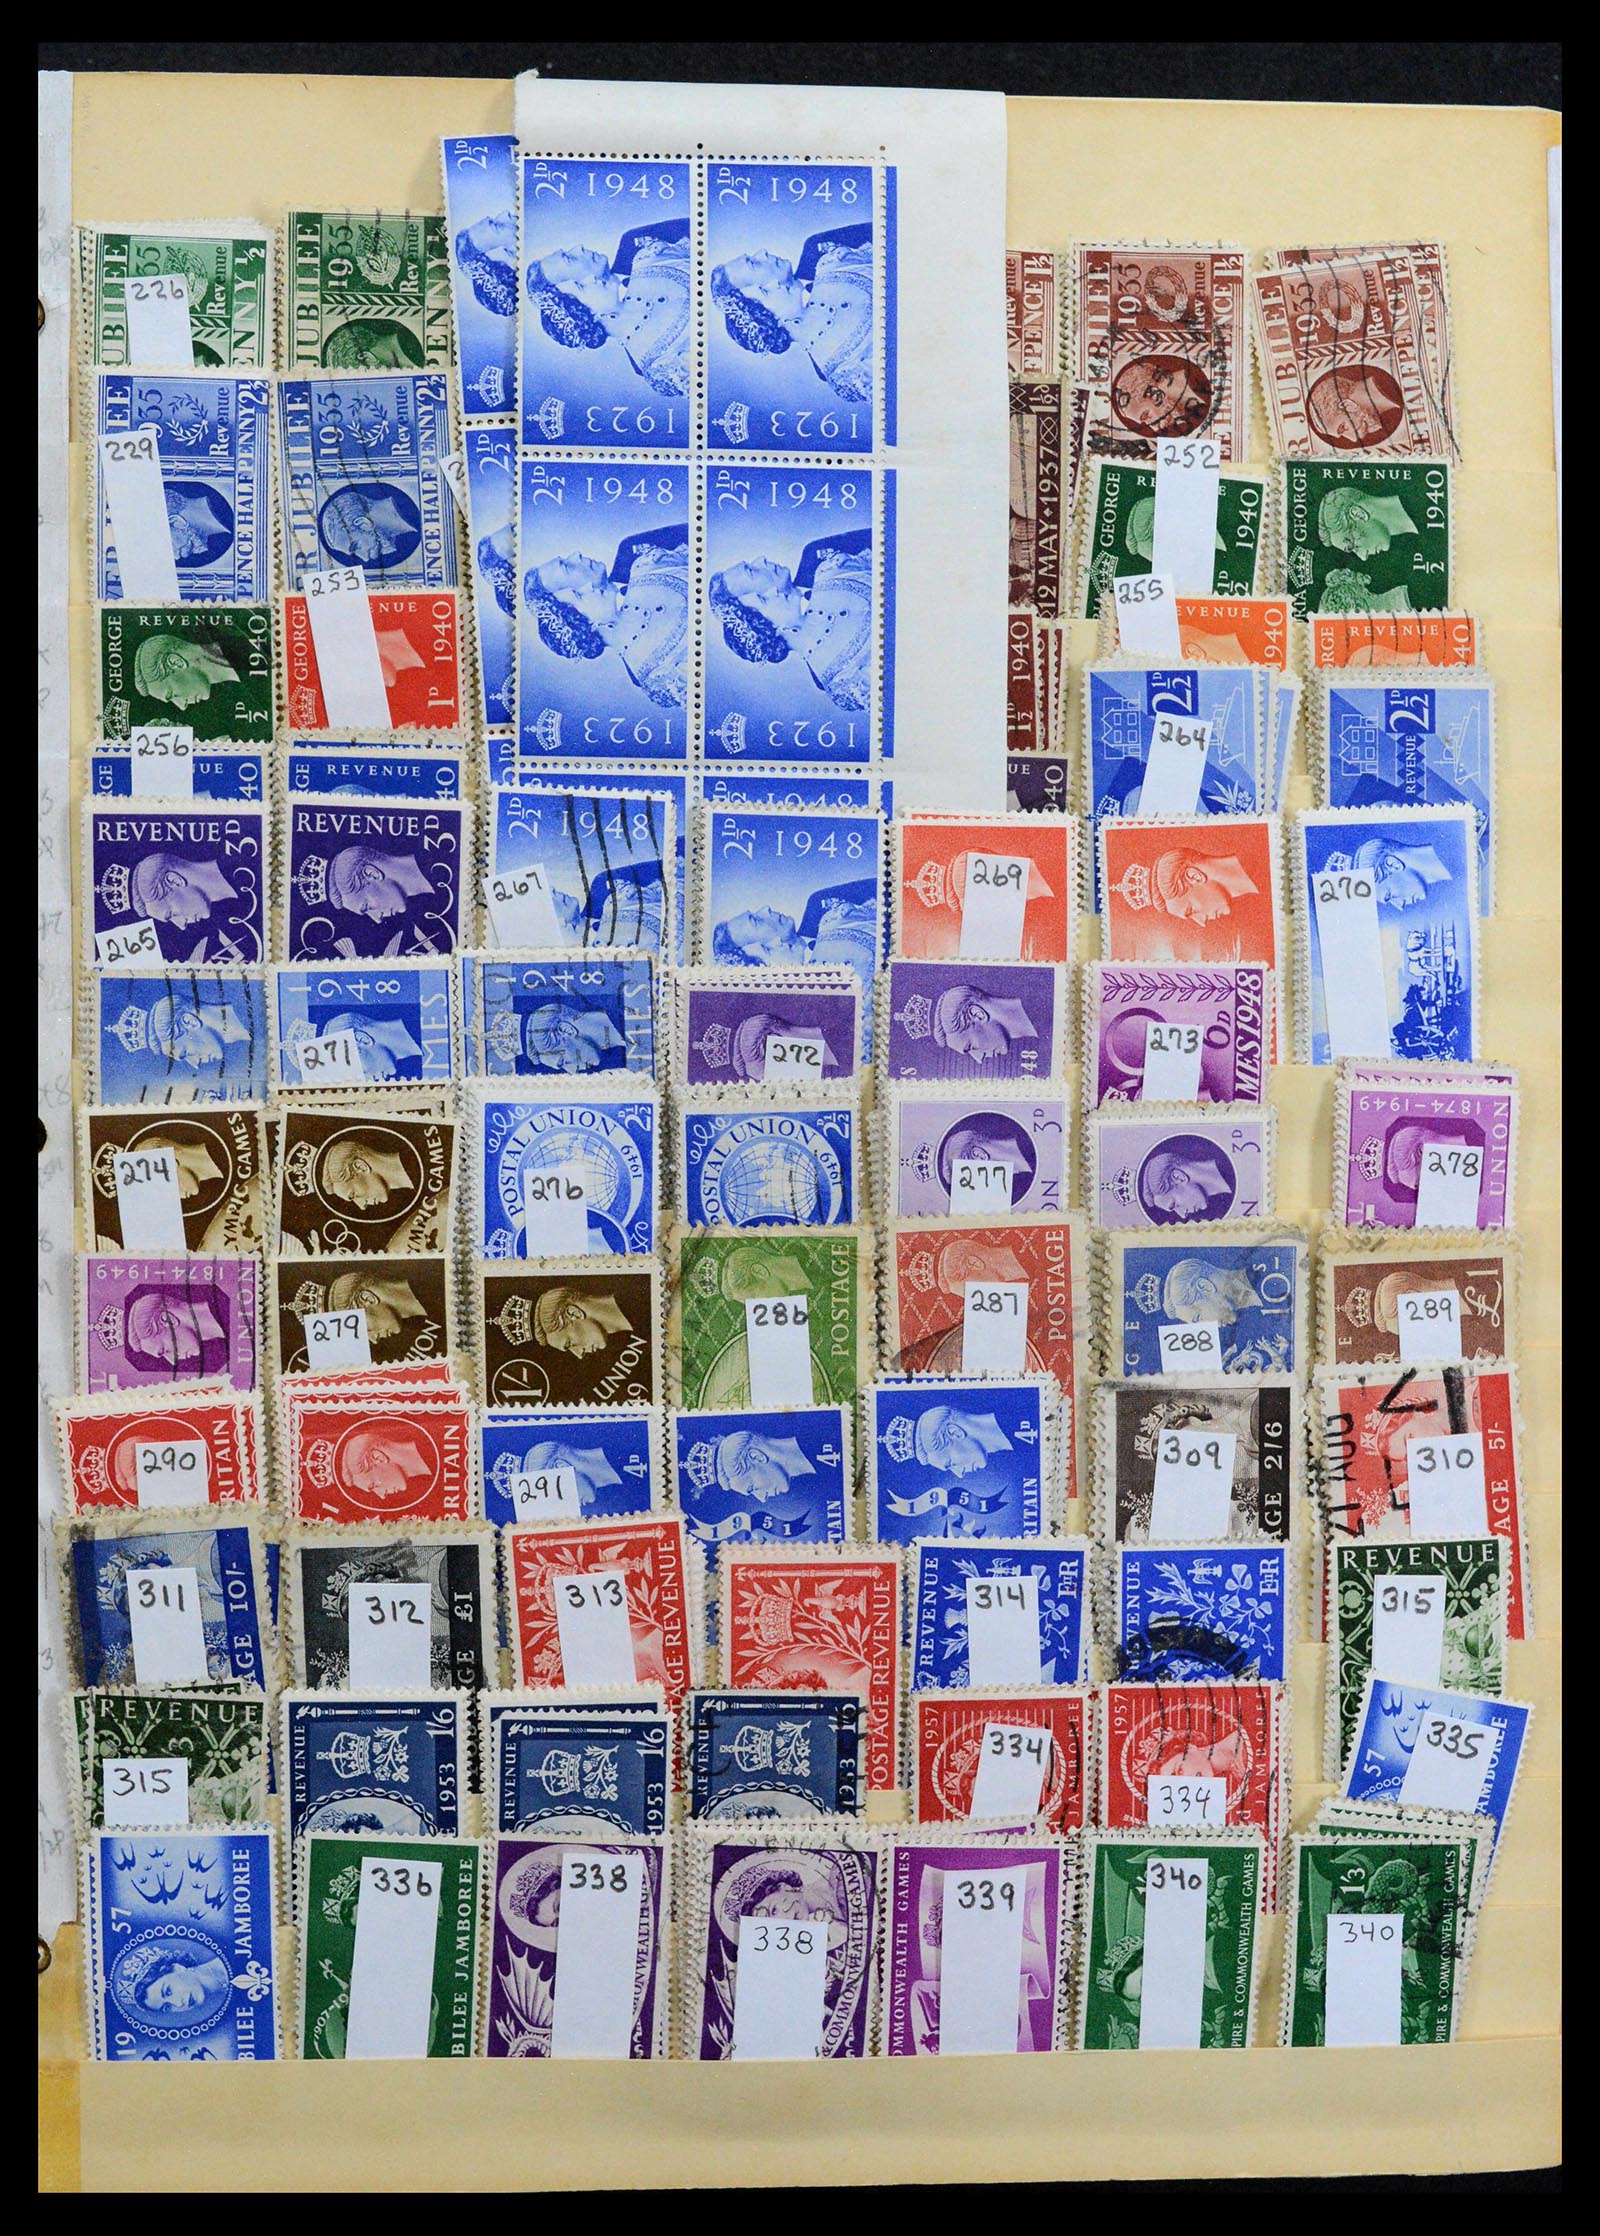 39194 0004 - Stamp collection 39194 Great Britain and Channel Islands 1935-2013.